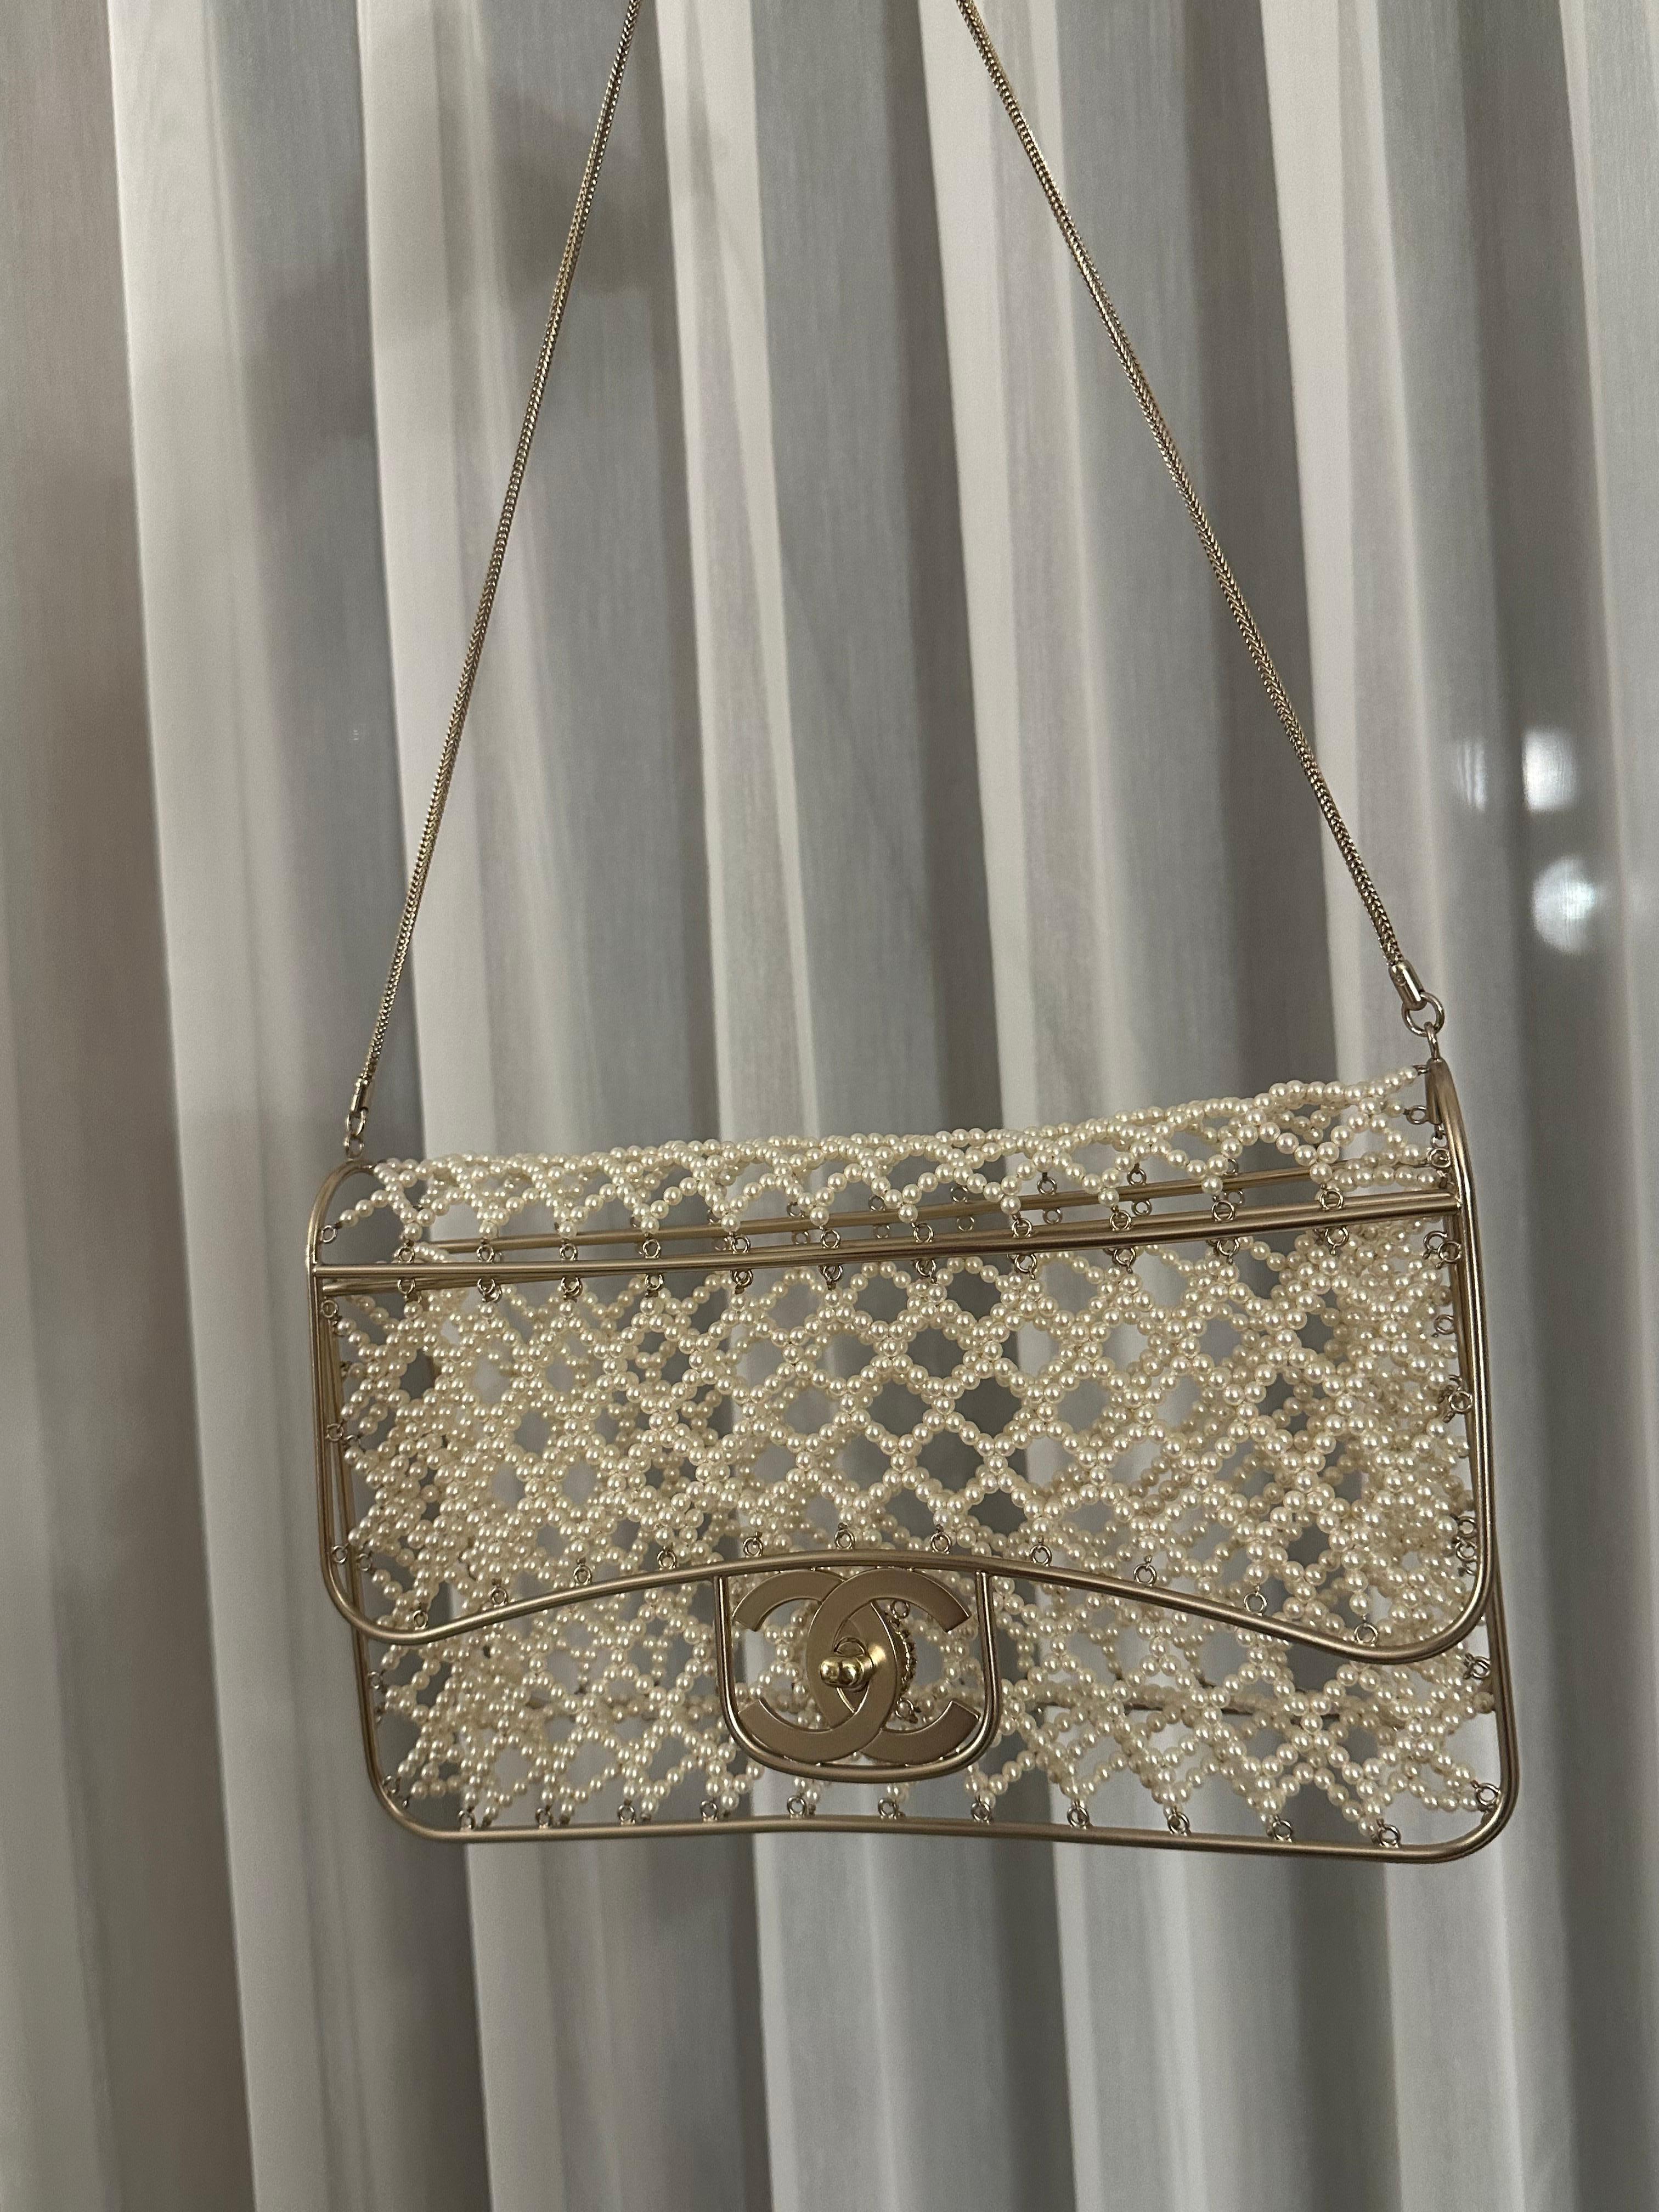 Chanel Runway Pearl Caged Flap Bag 14